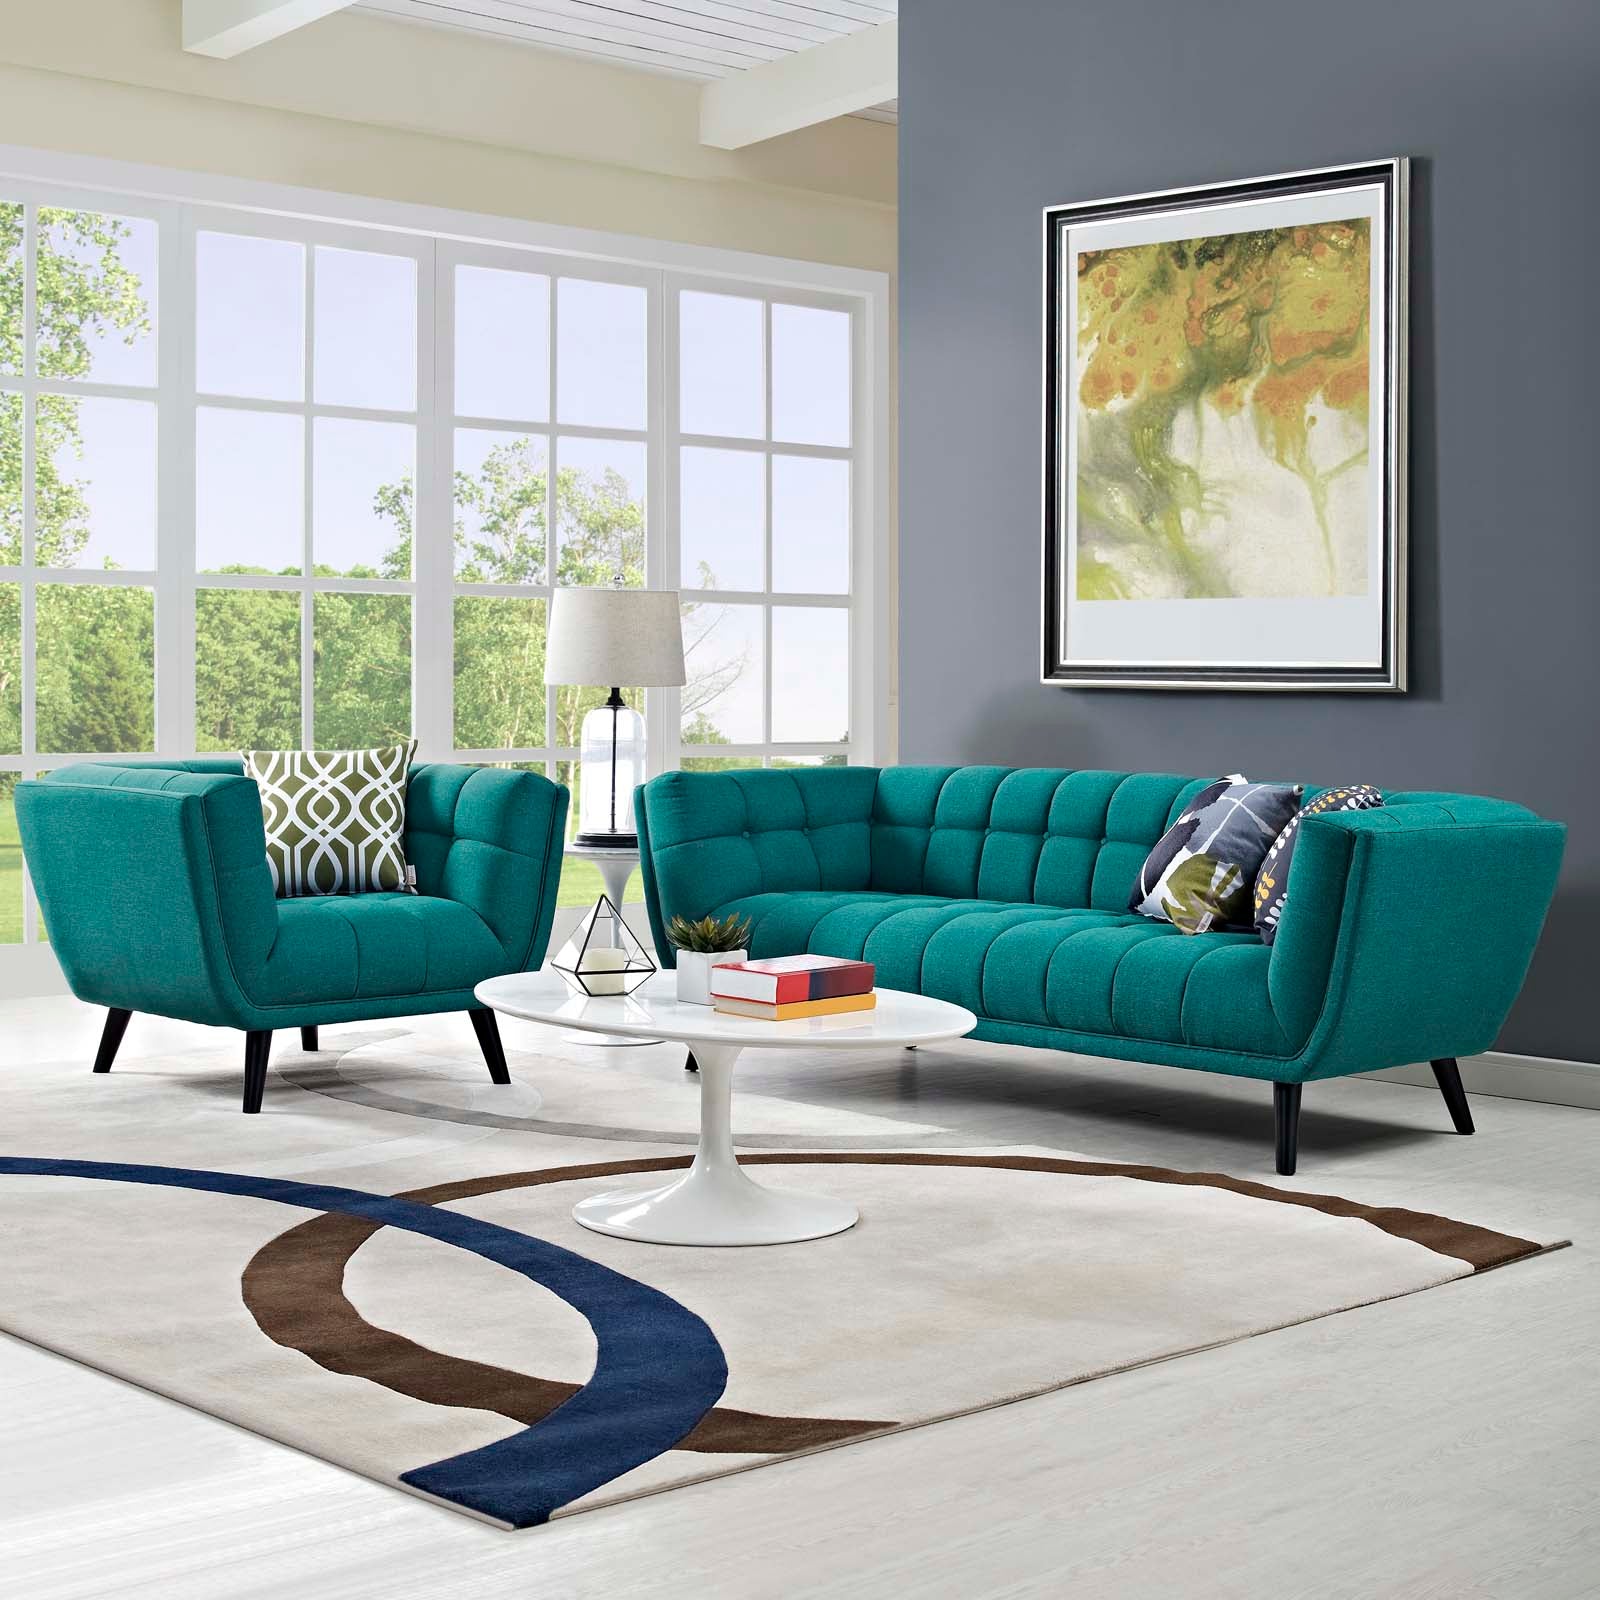 Bestow 2 Piece Upholstered Fabric Sofa and Armchair Set - East Shore Modern Home Furnishings